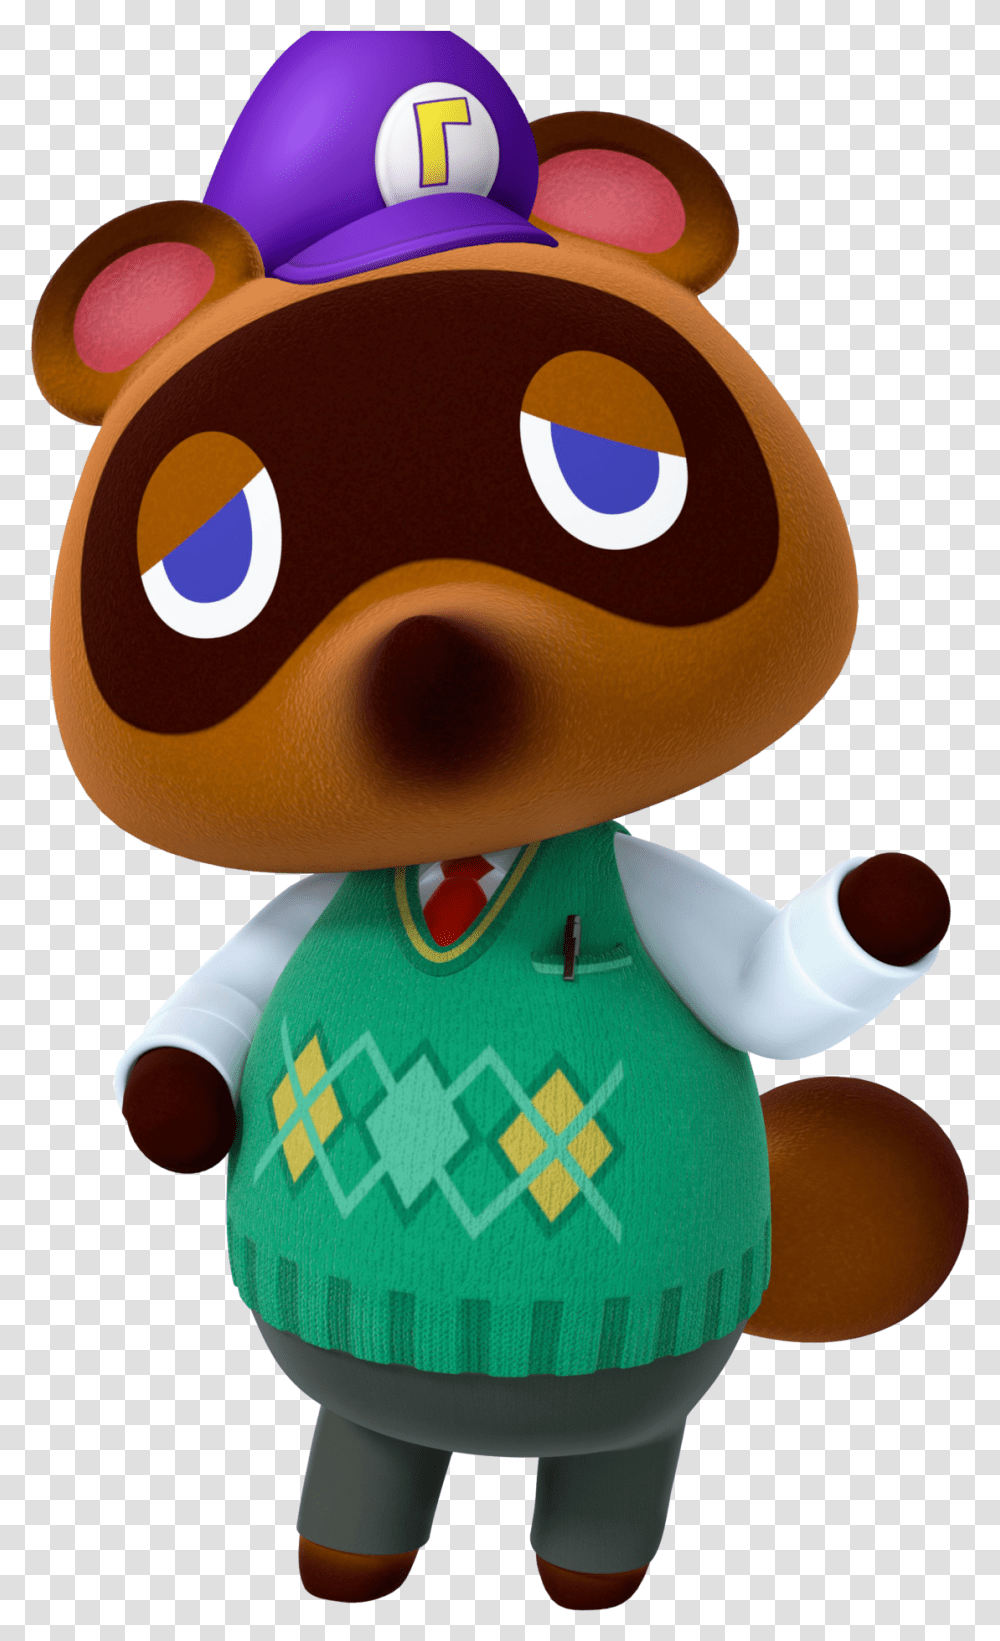 Waluigis Hat On Tom Nook Animal Crossing Character Tom Nook, Toy, Super Mario, Pac Man Transparent Png